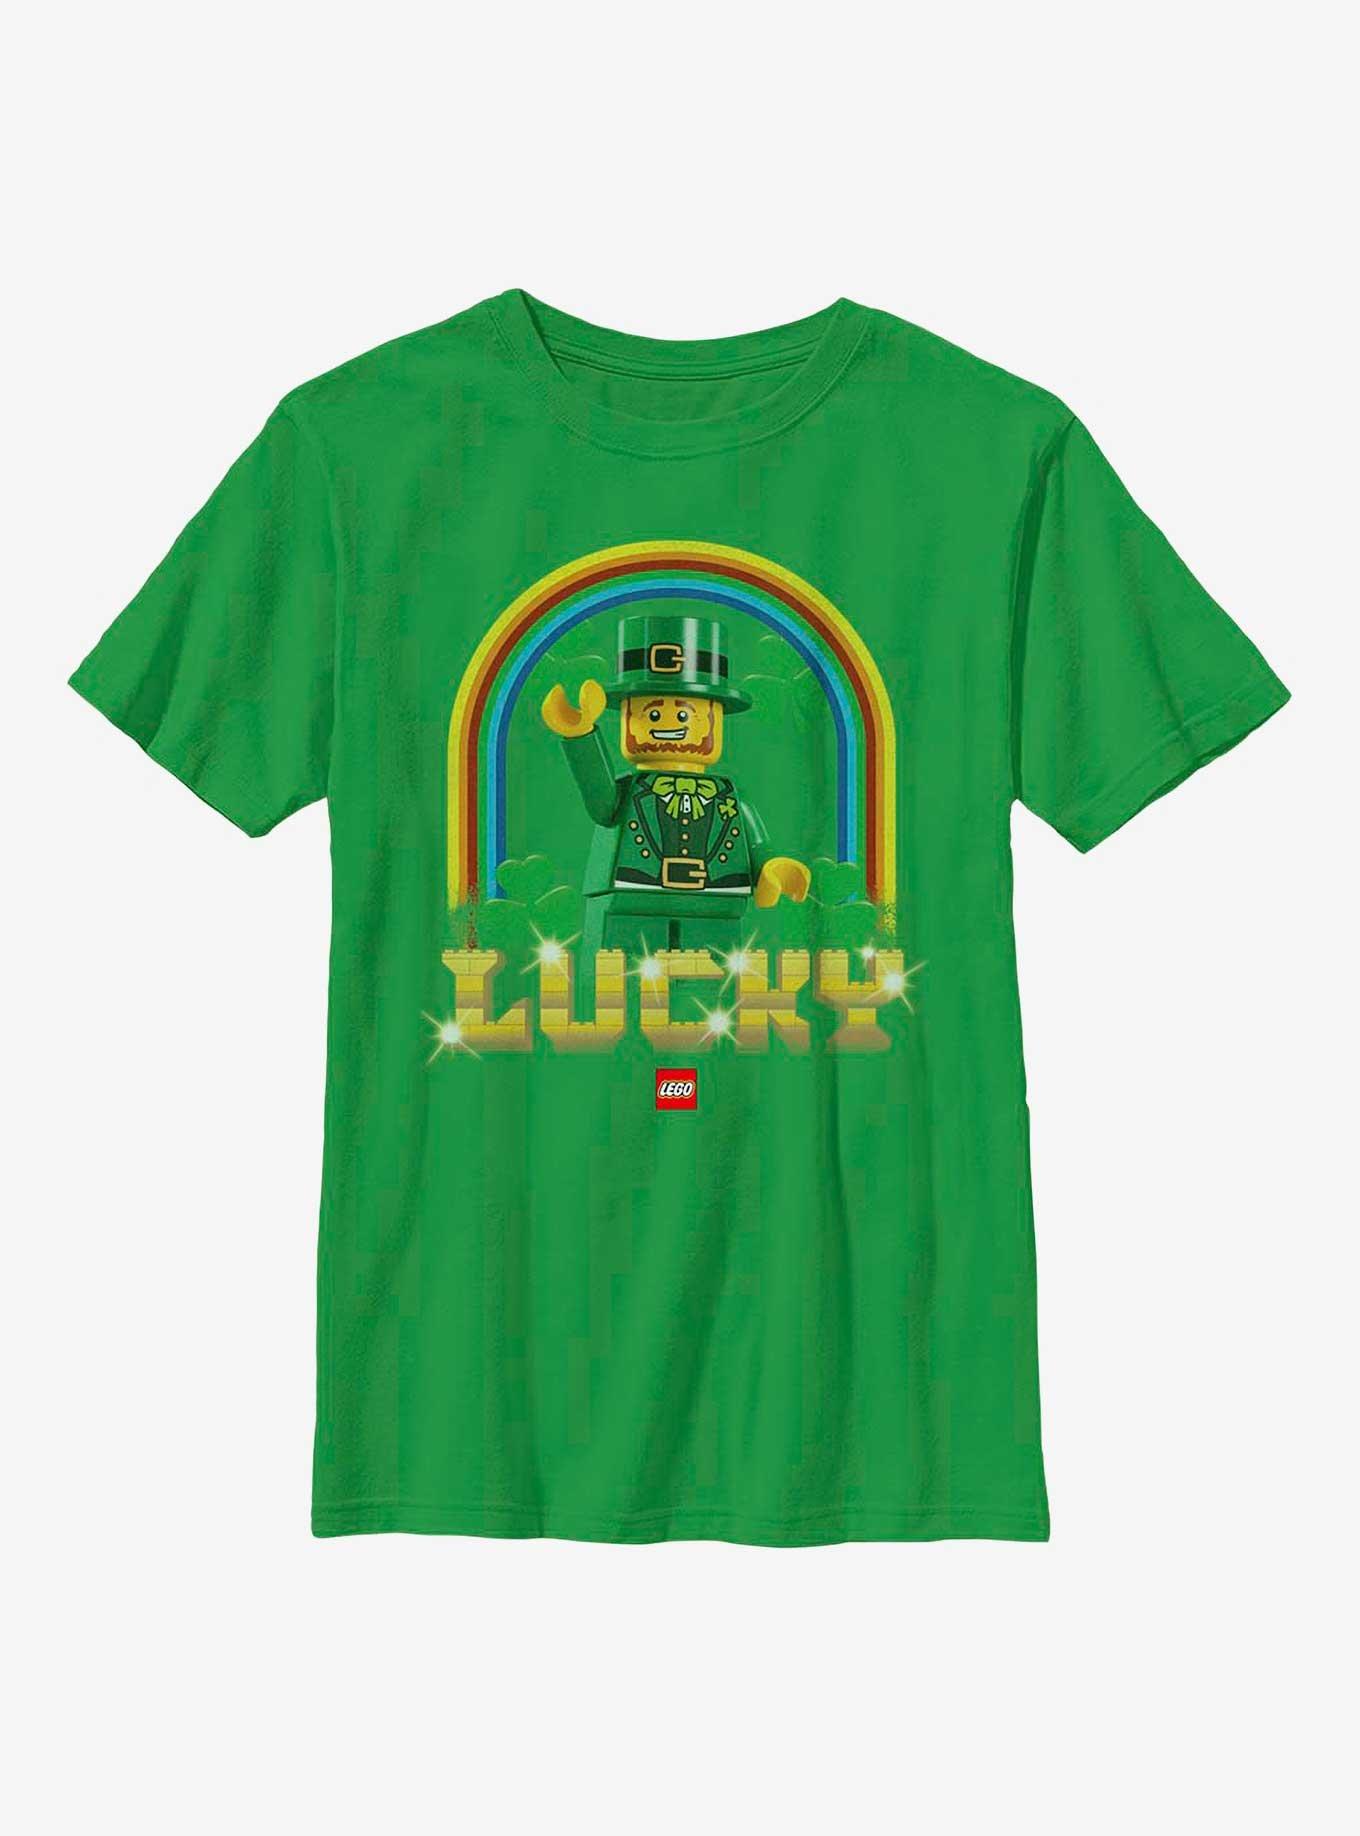 BoxLunch | Iconic LEGO GREEN Youth T-Shirt - Luck Raining